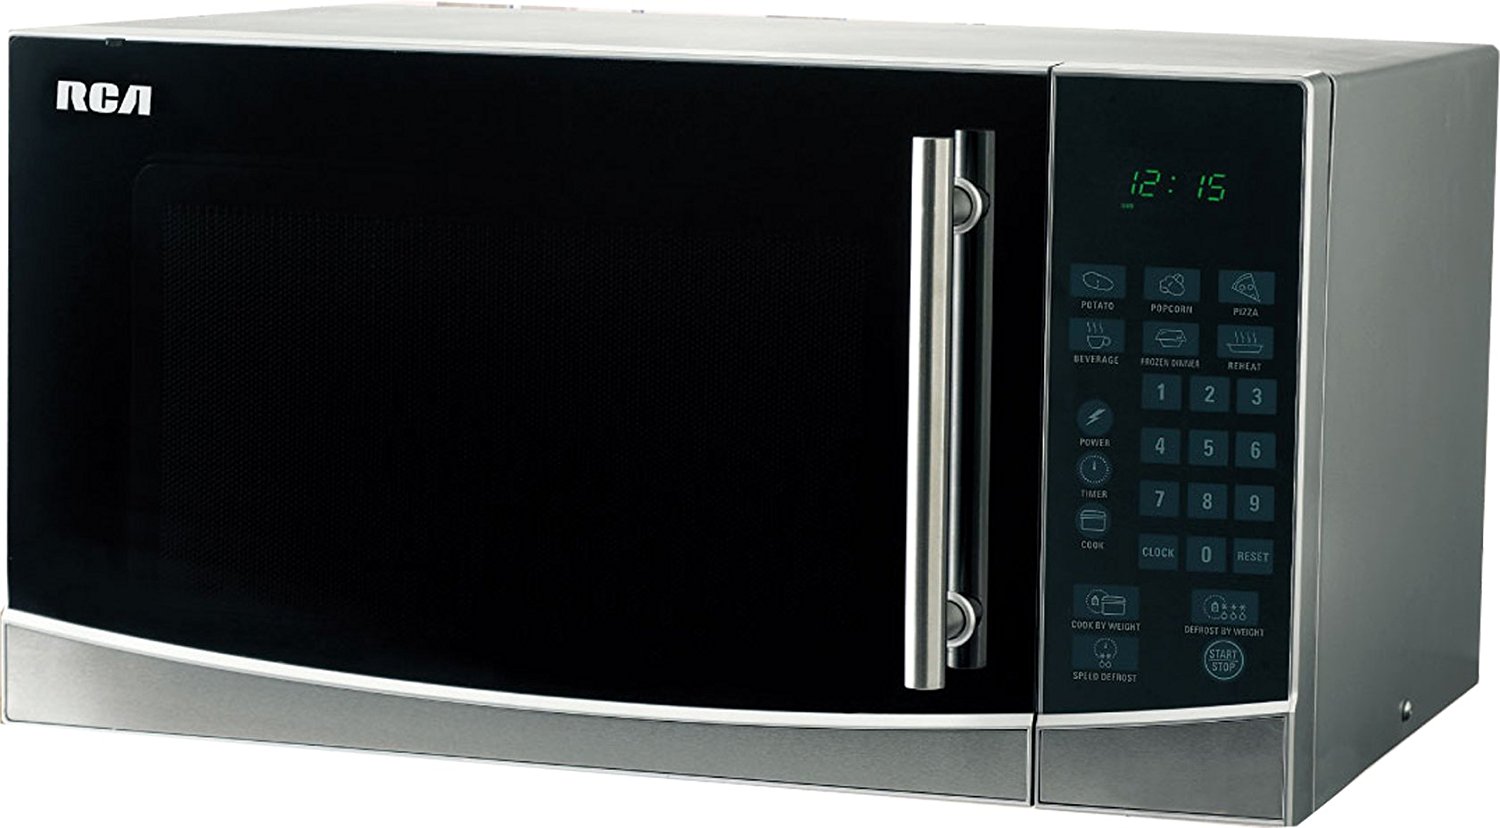 RCA 1.1 Cubic Foot Microwave, Stainless Steel